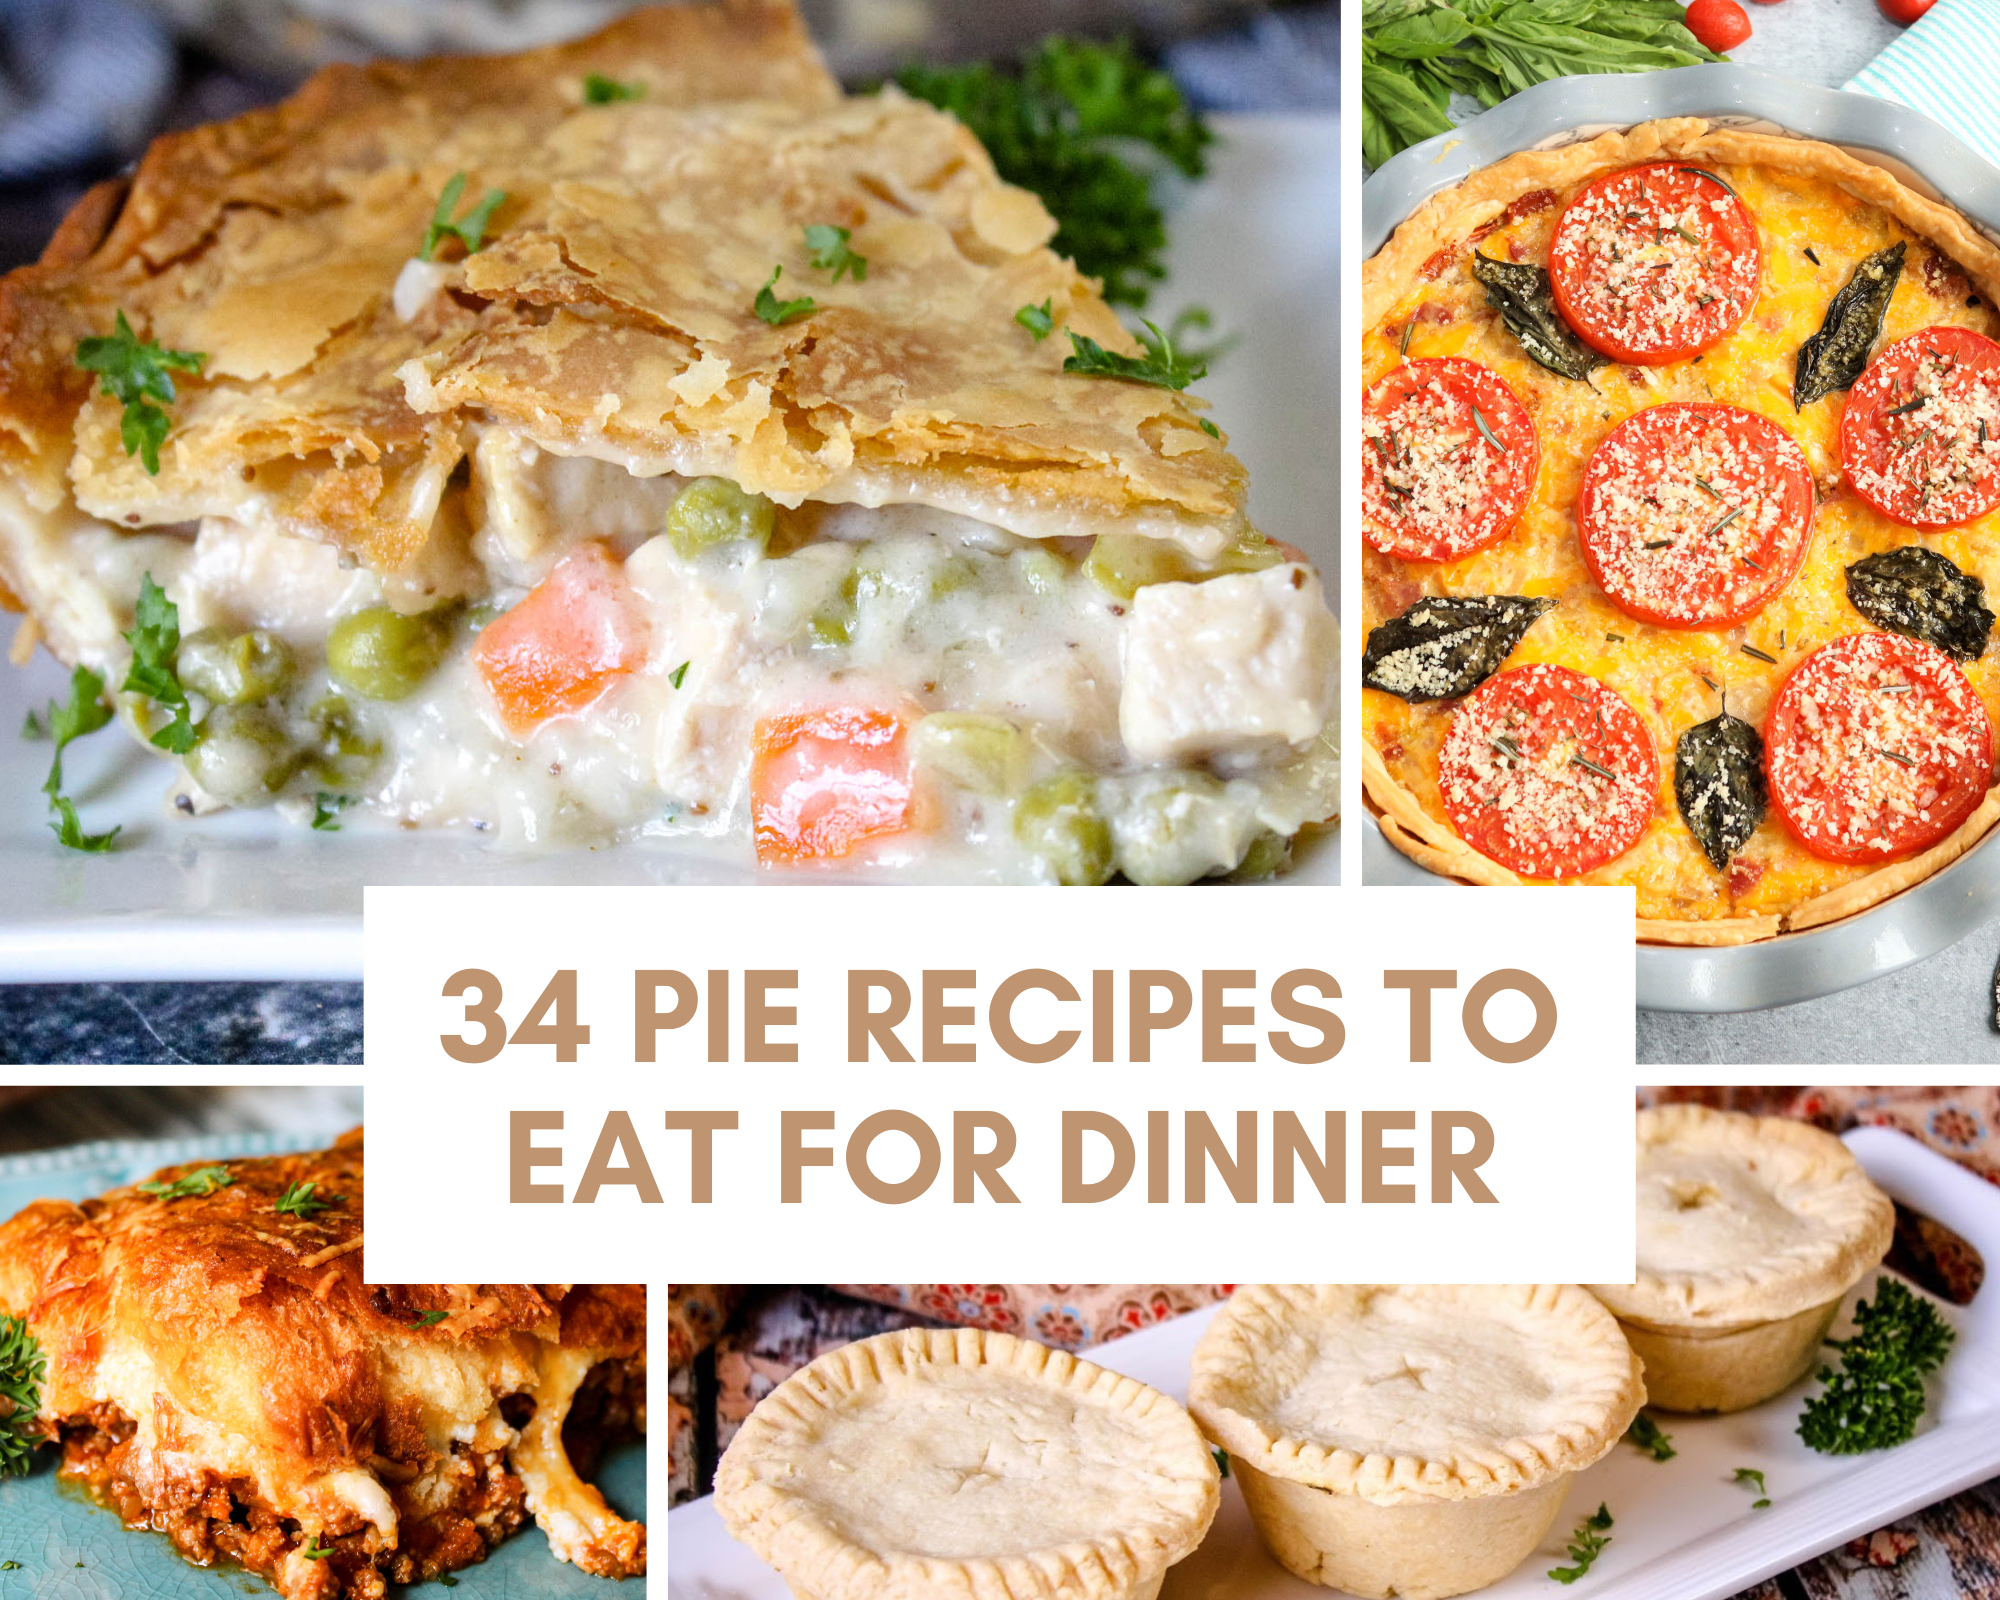 34 Pie Recipes to Eat for Dinner